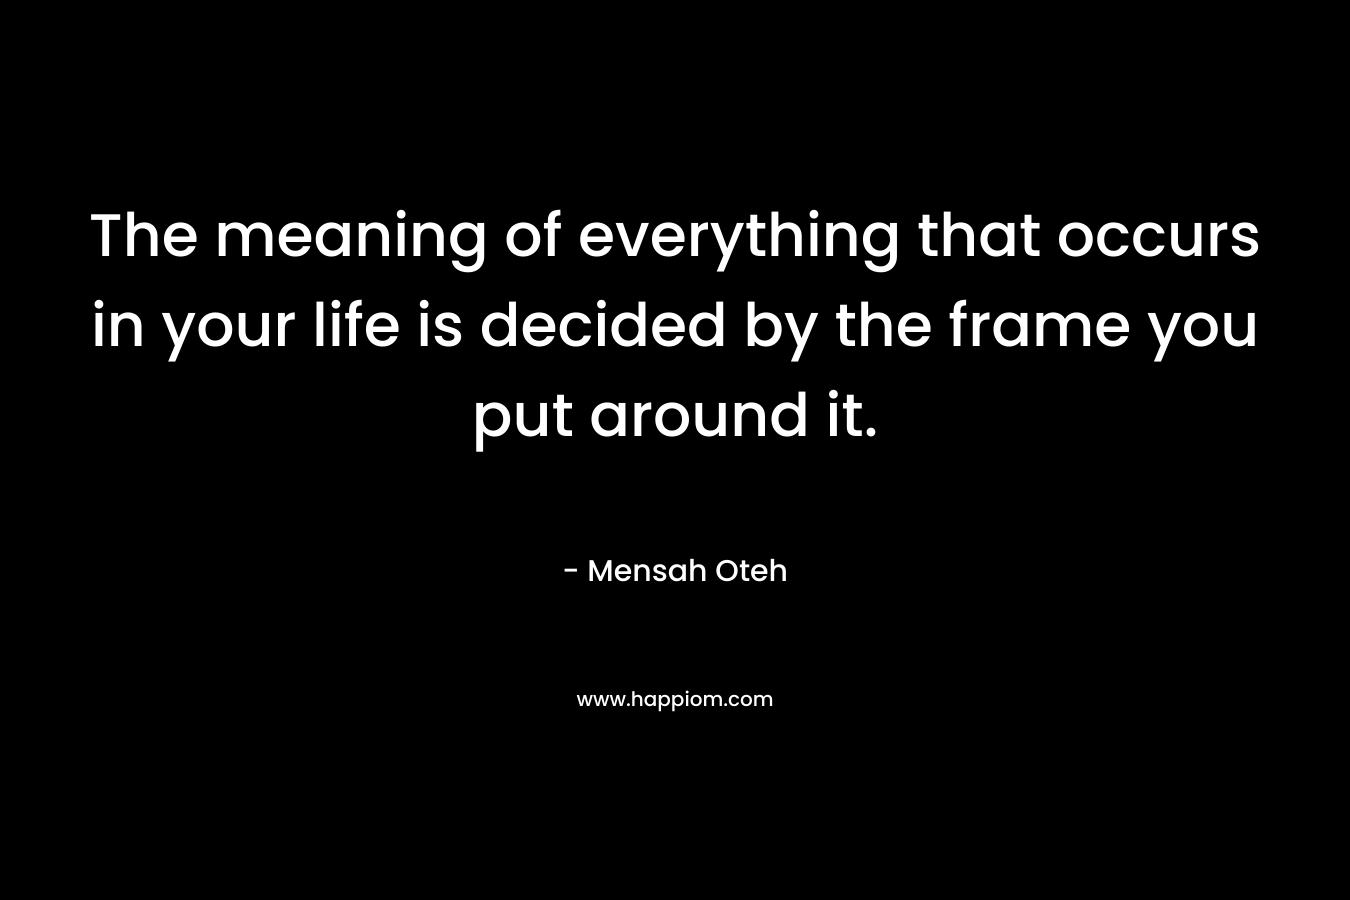 The meaning of everything that occurs in your life is decided by the frame you put around it.